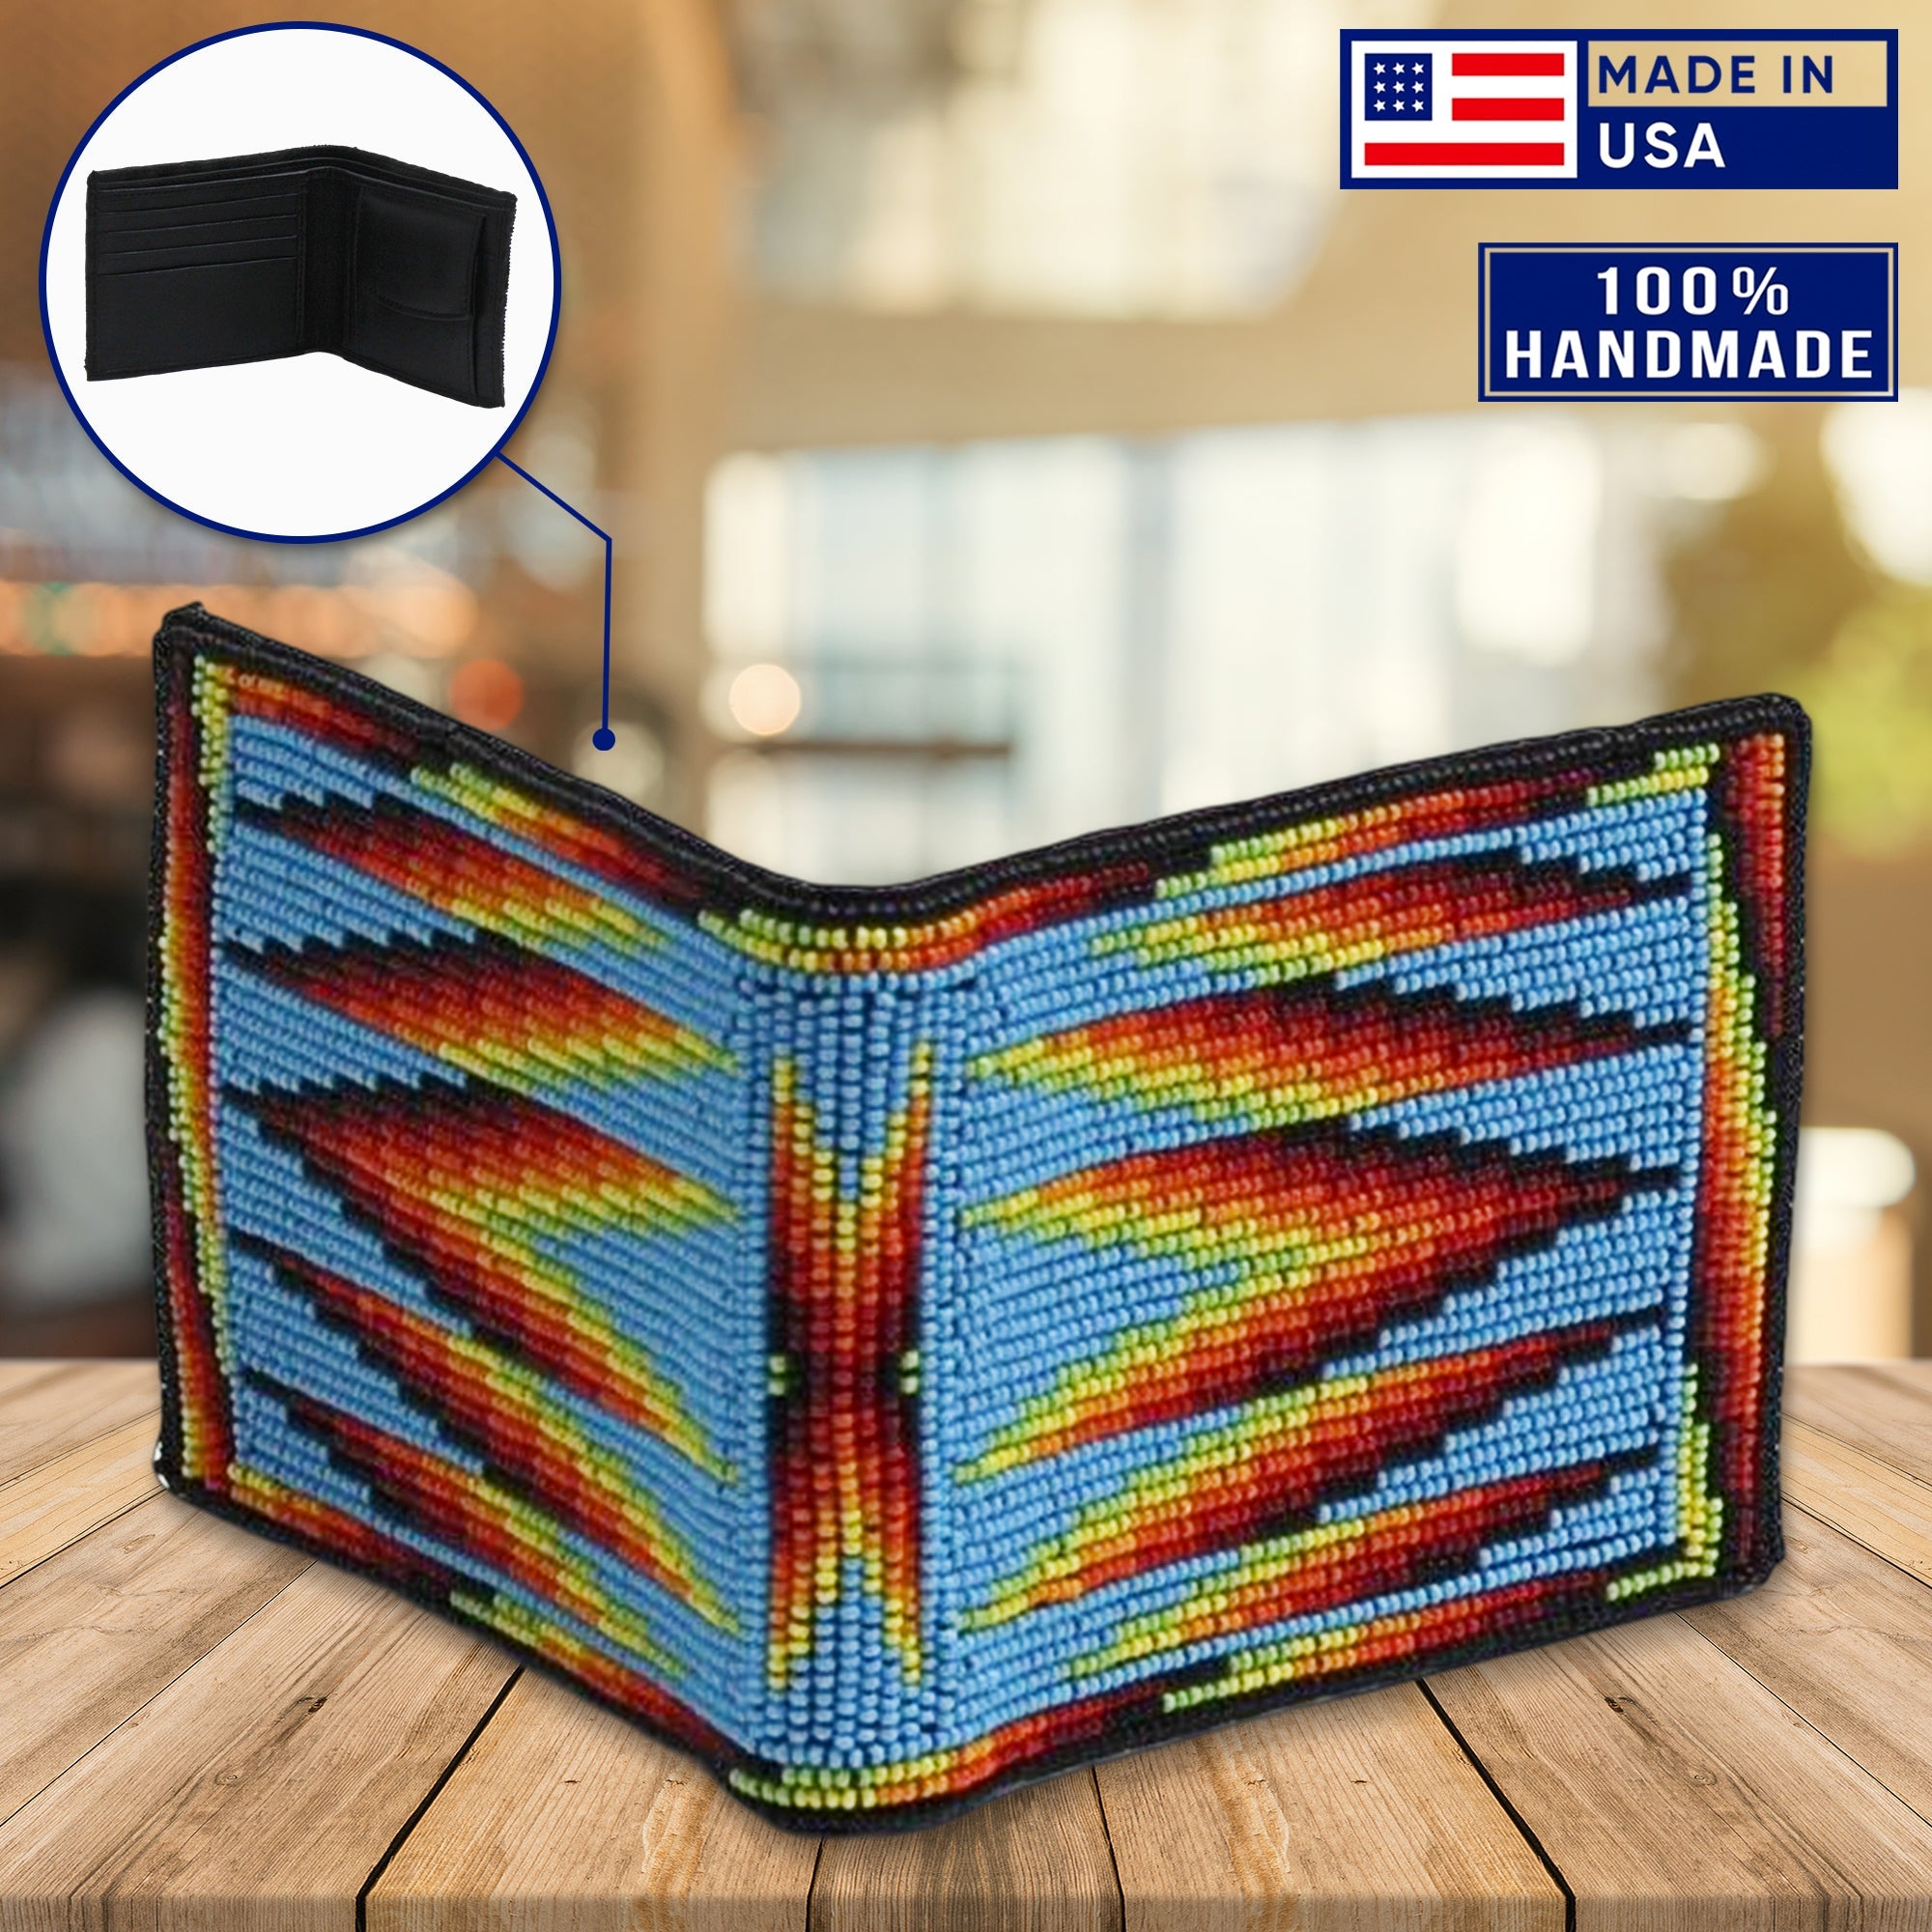 SALE 50% OFF - Handmade Beaded Blue Native American style genuine leather Men’s bifold Wallet/purse IBL